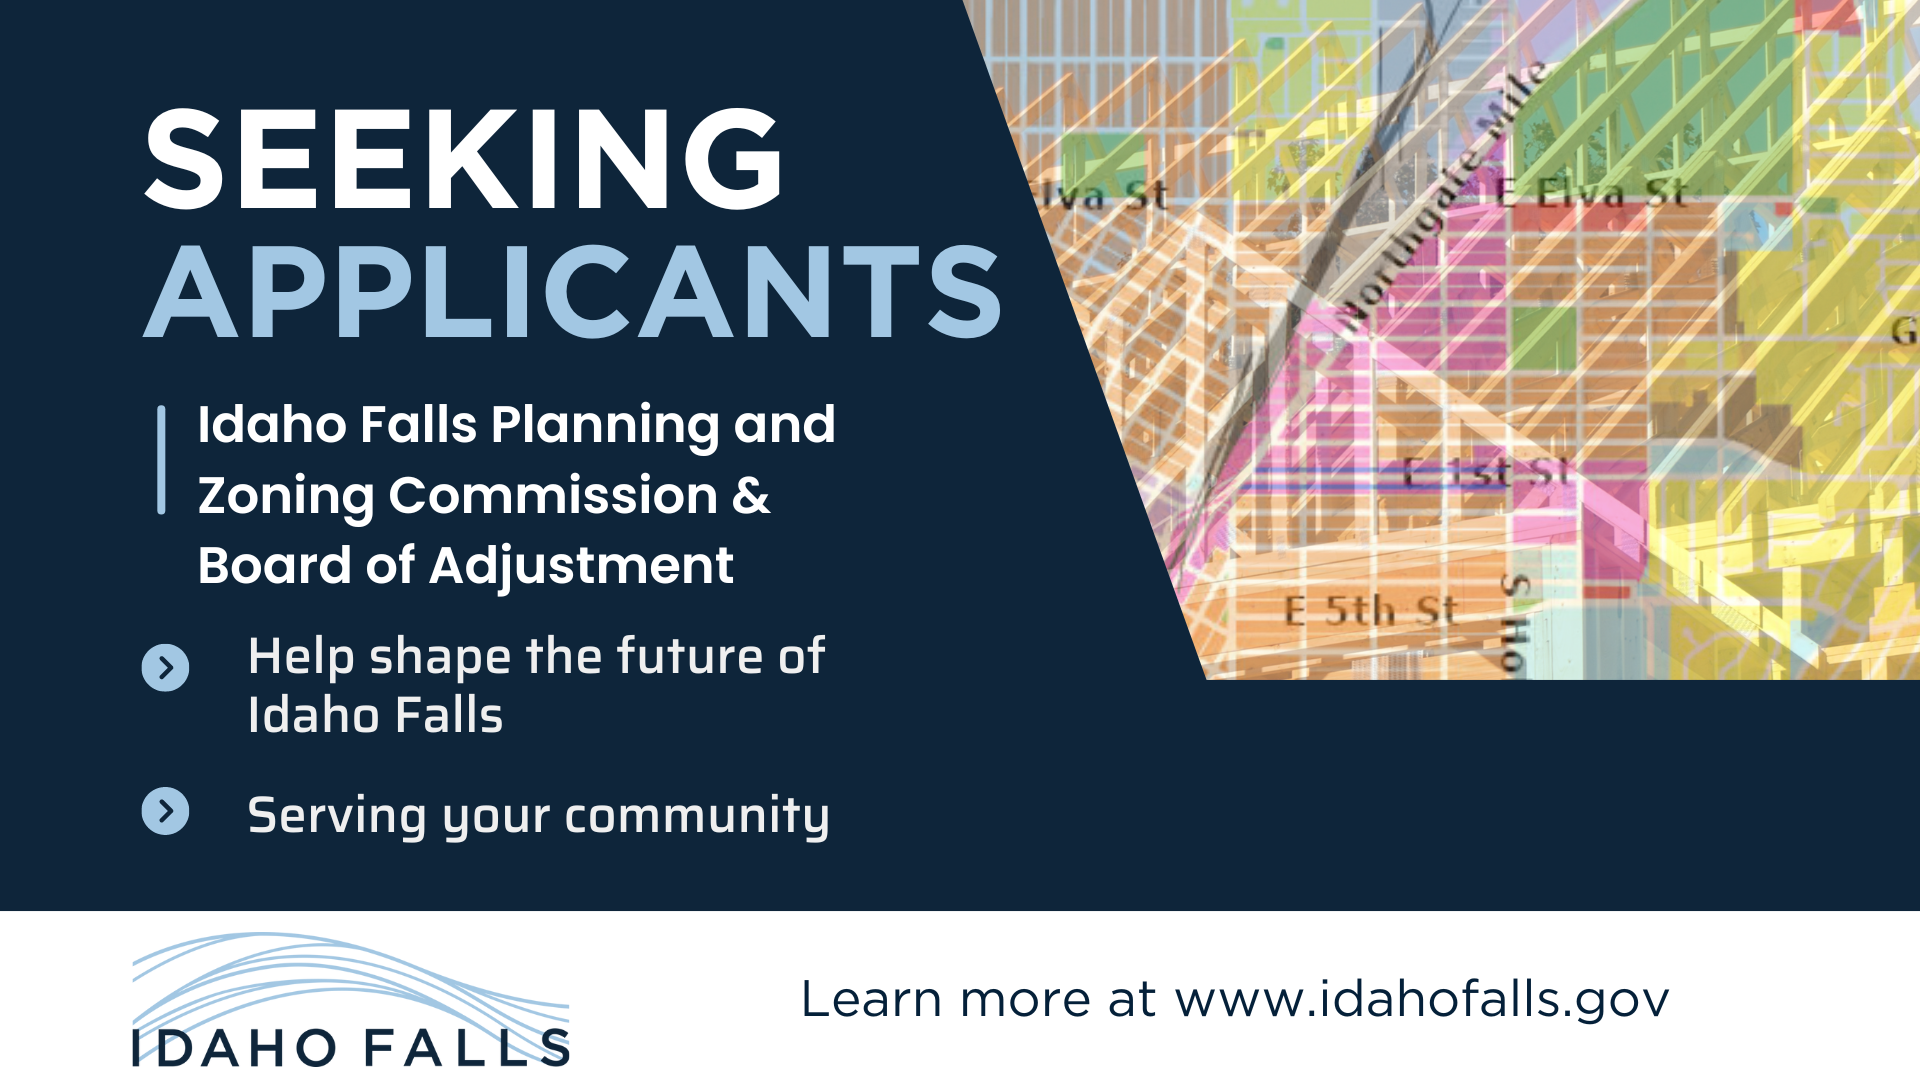  Help shape the future of Idaho Falls with these board and commission openings 